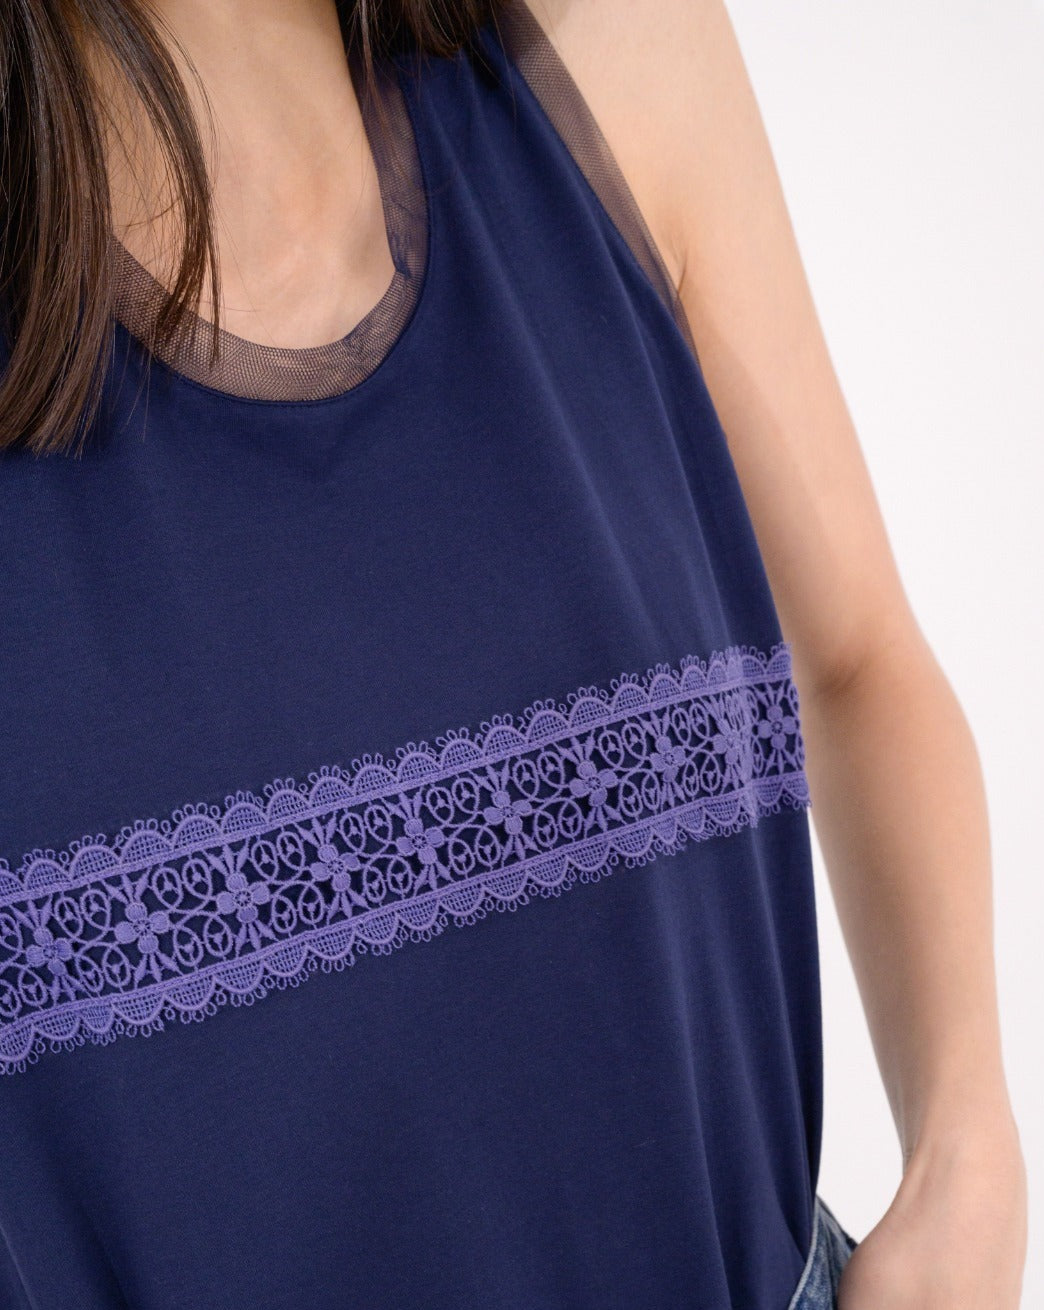 Load image into Gallery viewer, aalis ILO knit tank with mesh trim and lace panel (Navy lace)
